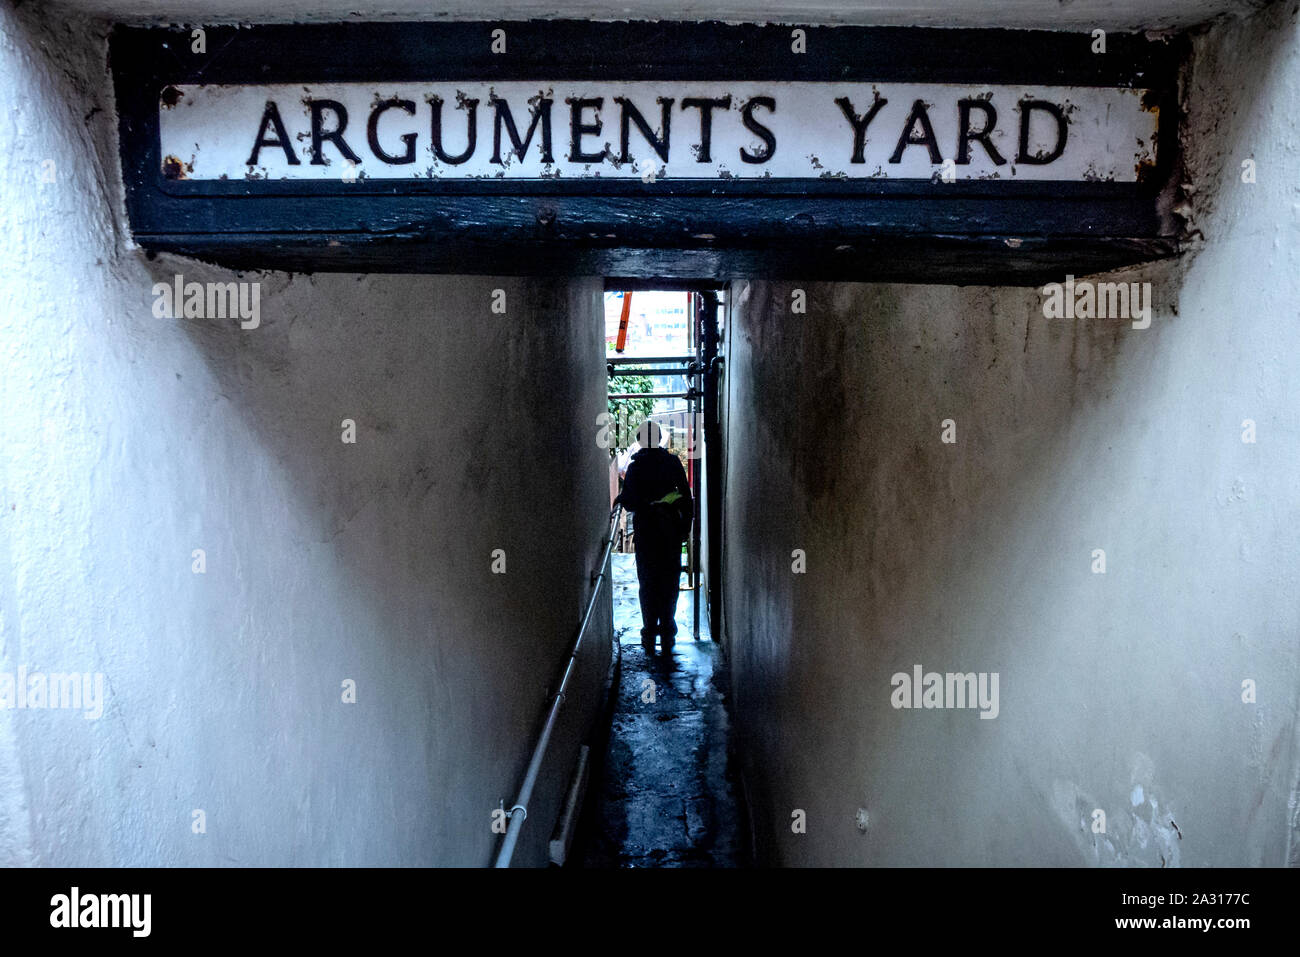 Arguments Yard in Whitby Stock Photo